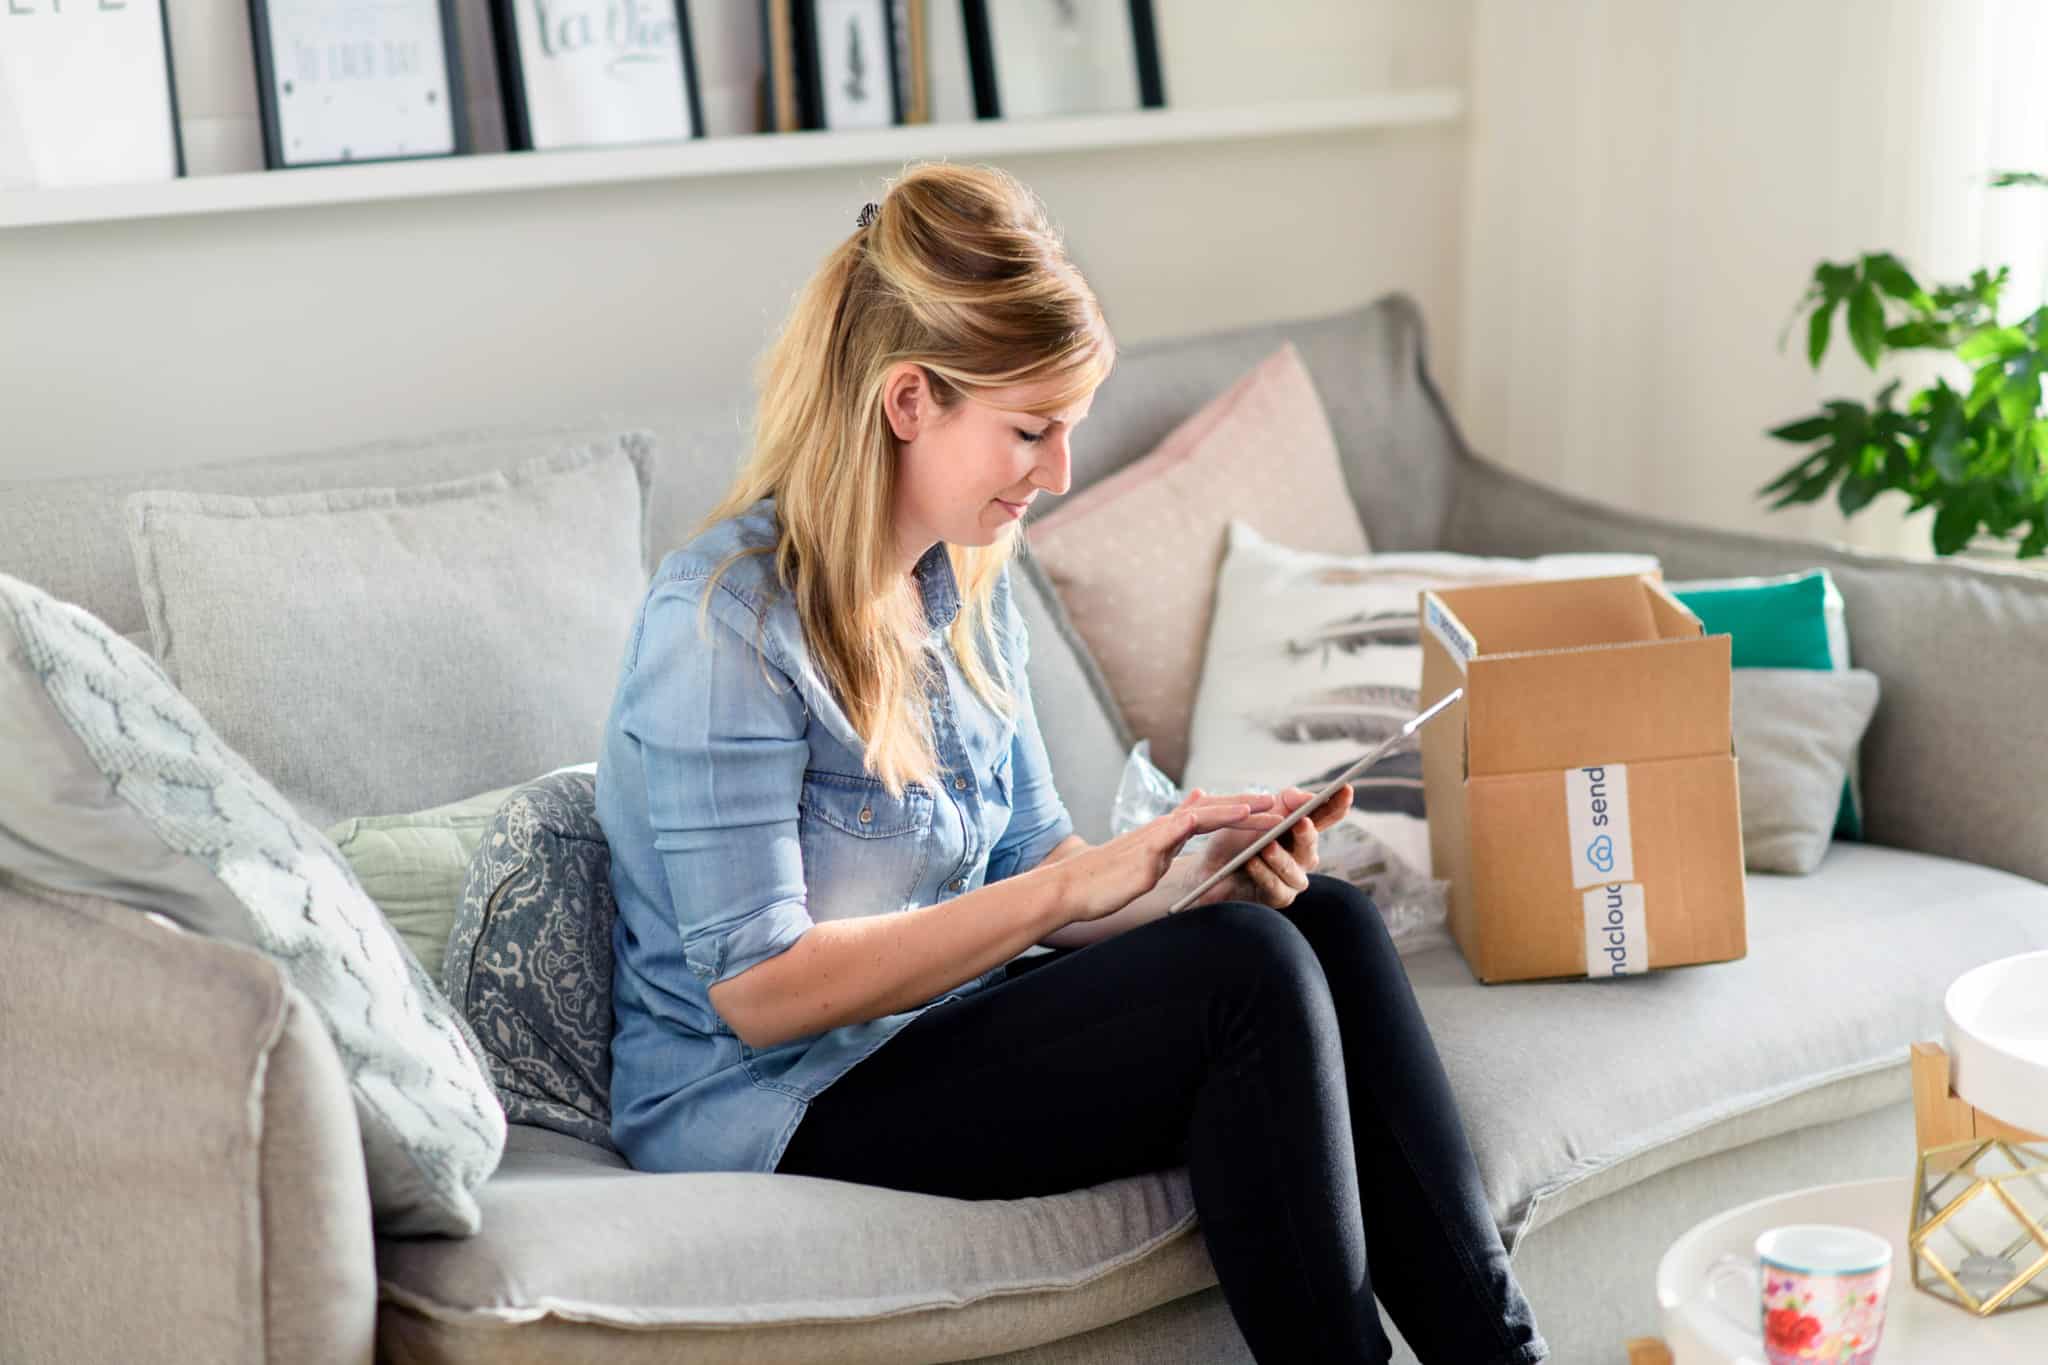 2 out of 3 consumers abandon online orders in absence of return policy